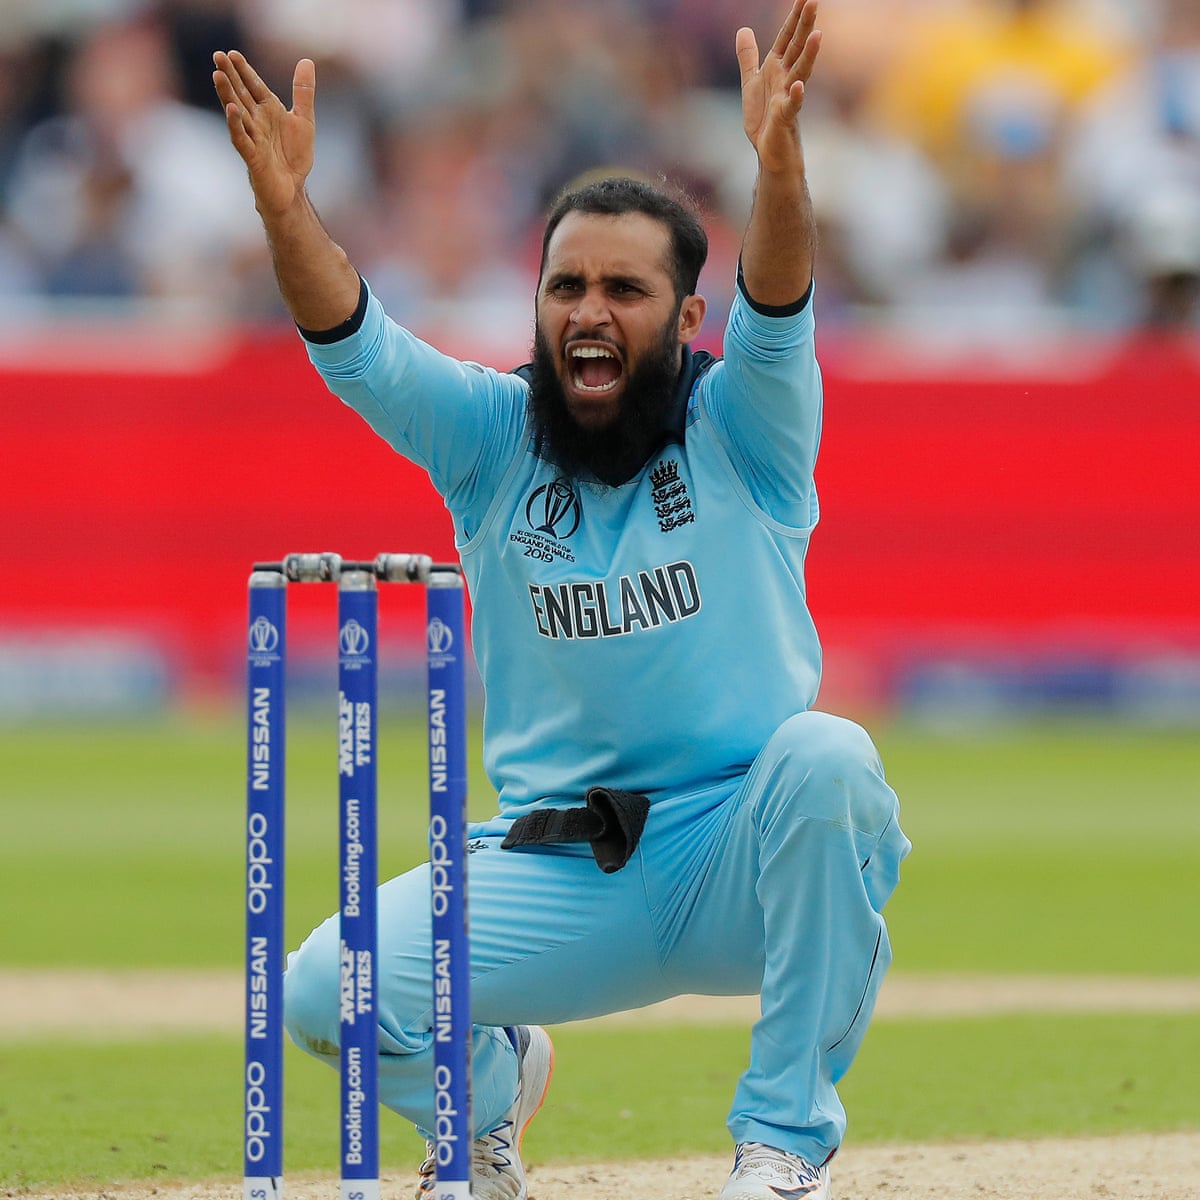 Adil Rashid: 'If I don't get a Test deal, I need to decide what to do next'  | England cricket team | The Guardian